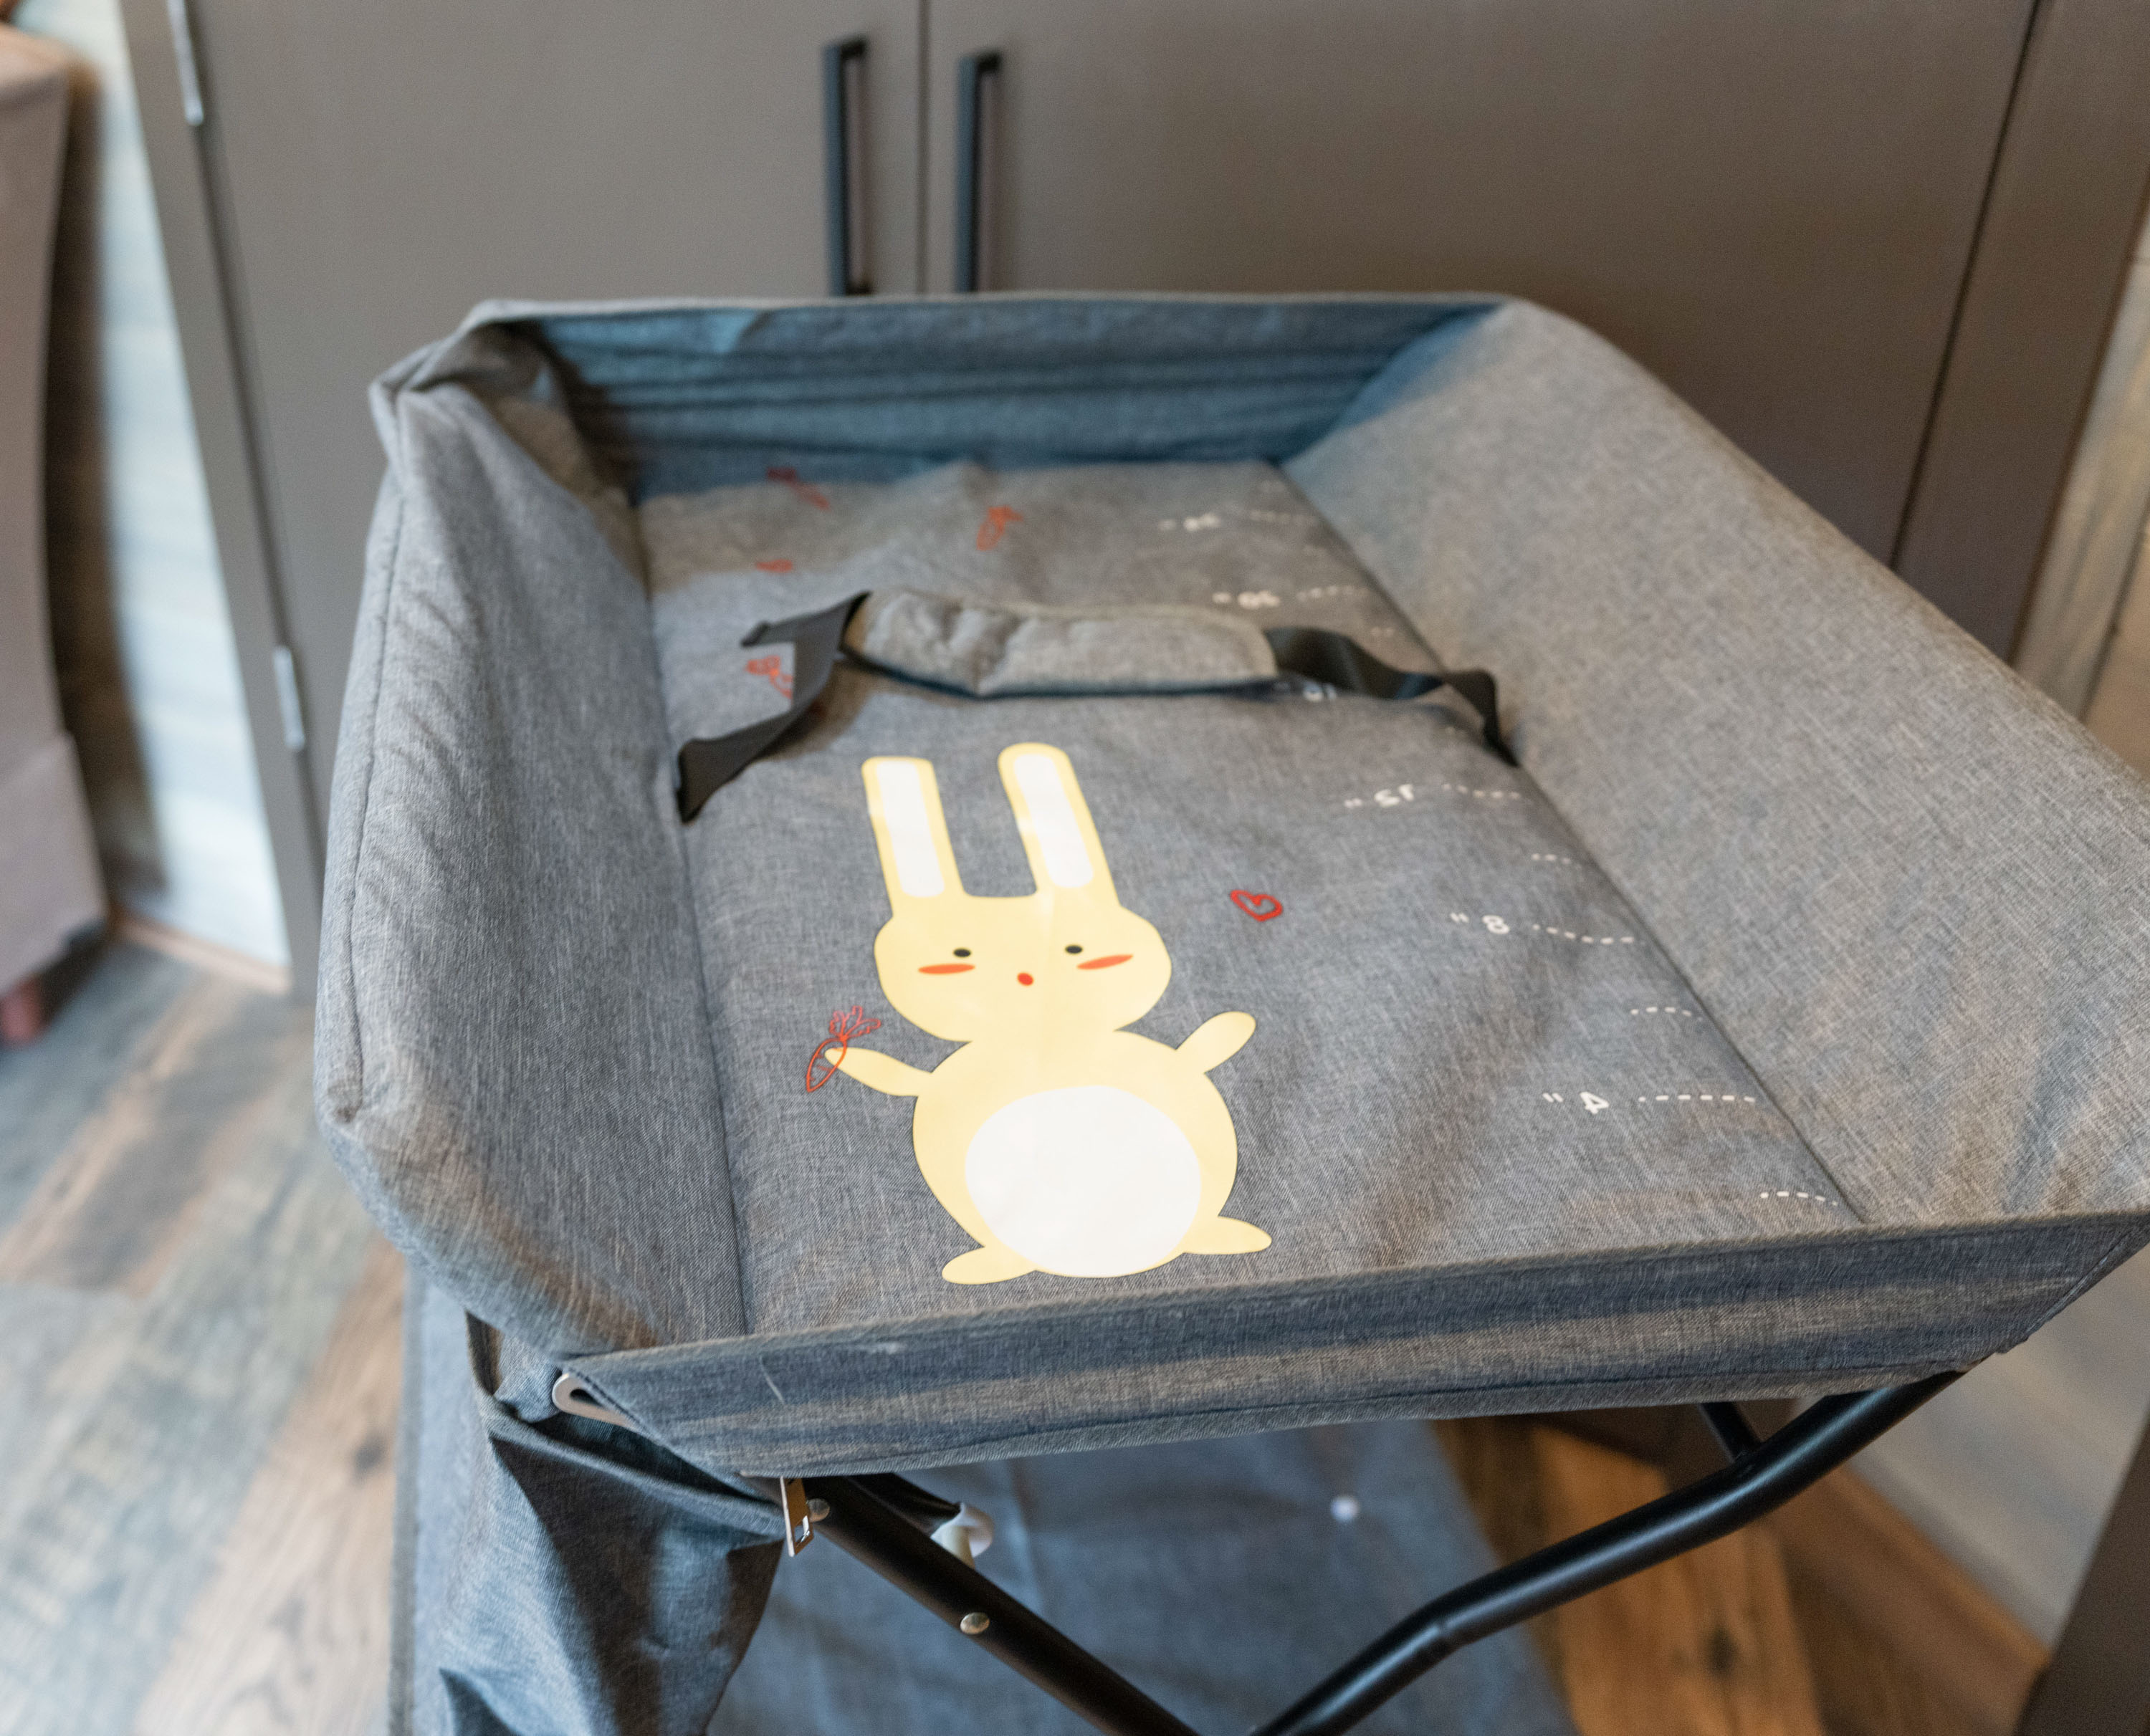 <span  class="uc_style_uc_tiles_grid_image_elementor_uc_items_attribute_title" style="color:#ffffff;">Baby Changing Table. We also have a high chair and crib.</span>